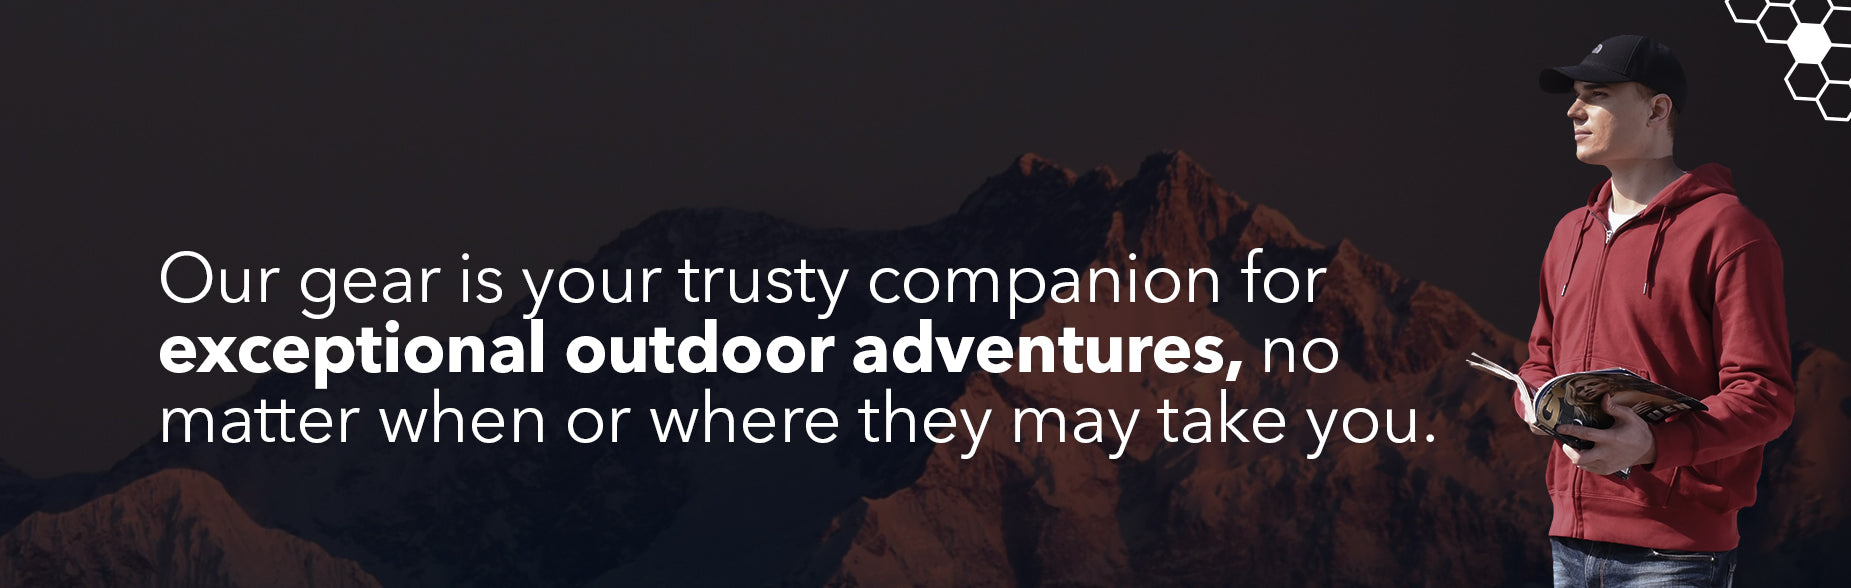 SUV camping gear D-Hive trusty companion for outdoors adventures 